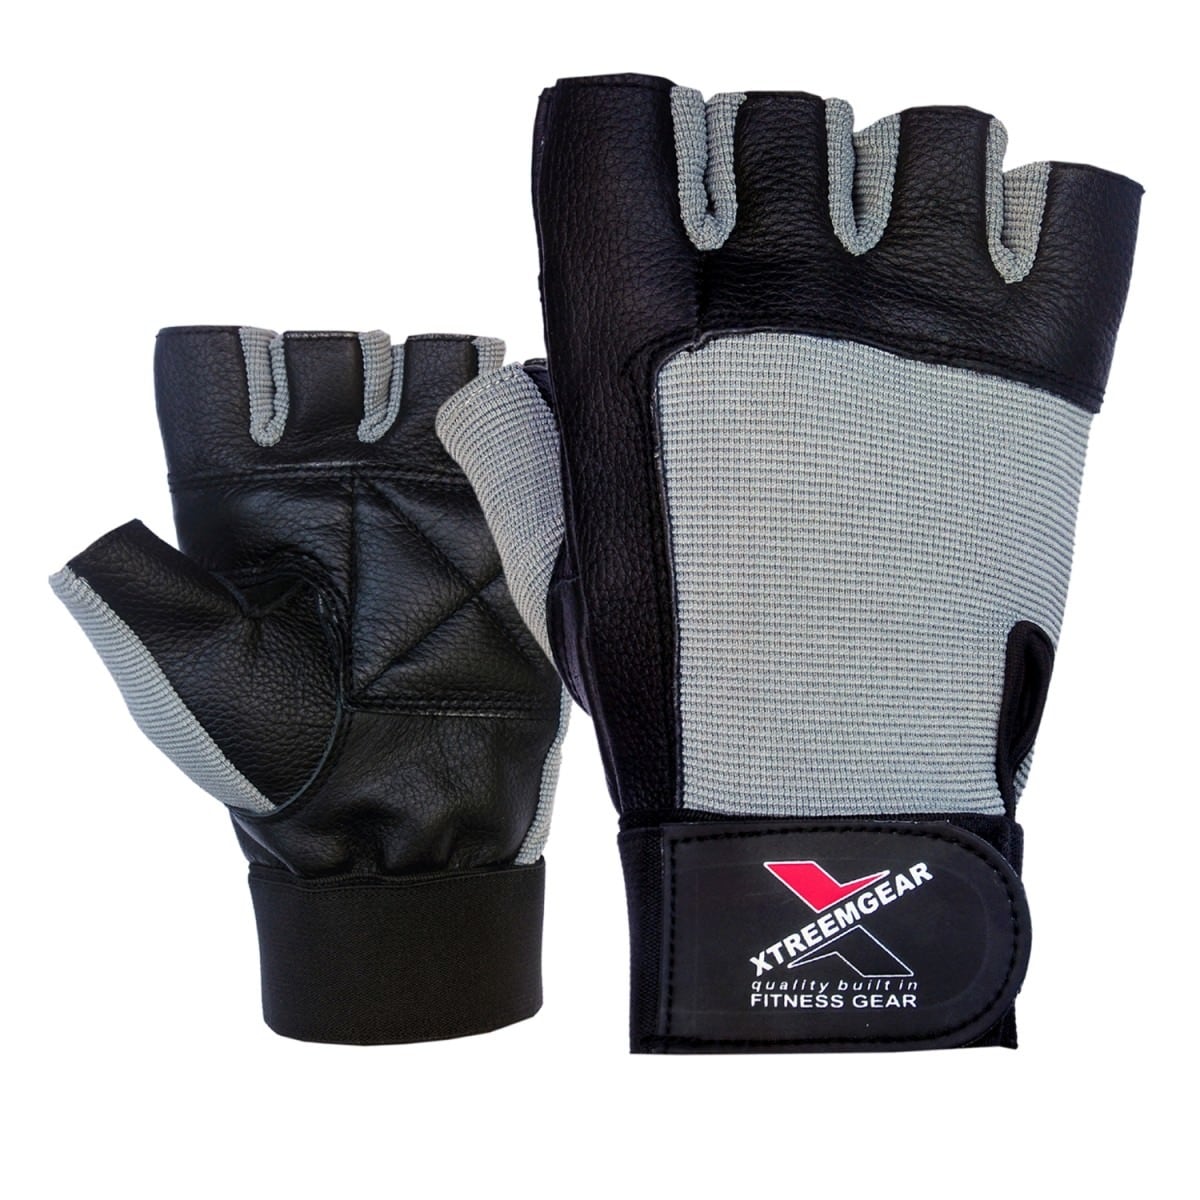 weight lifting gloves padded palm